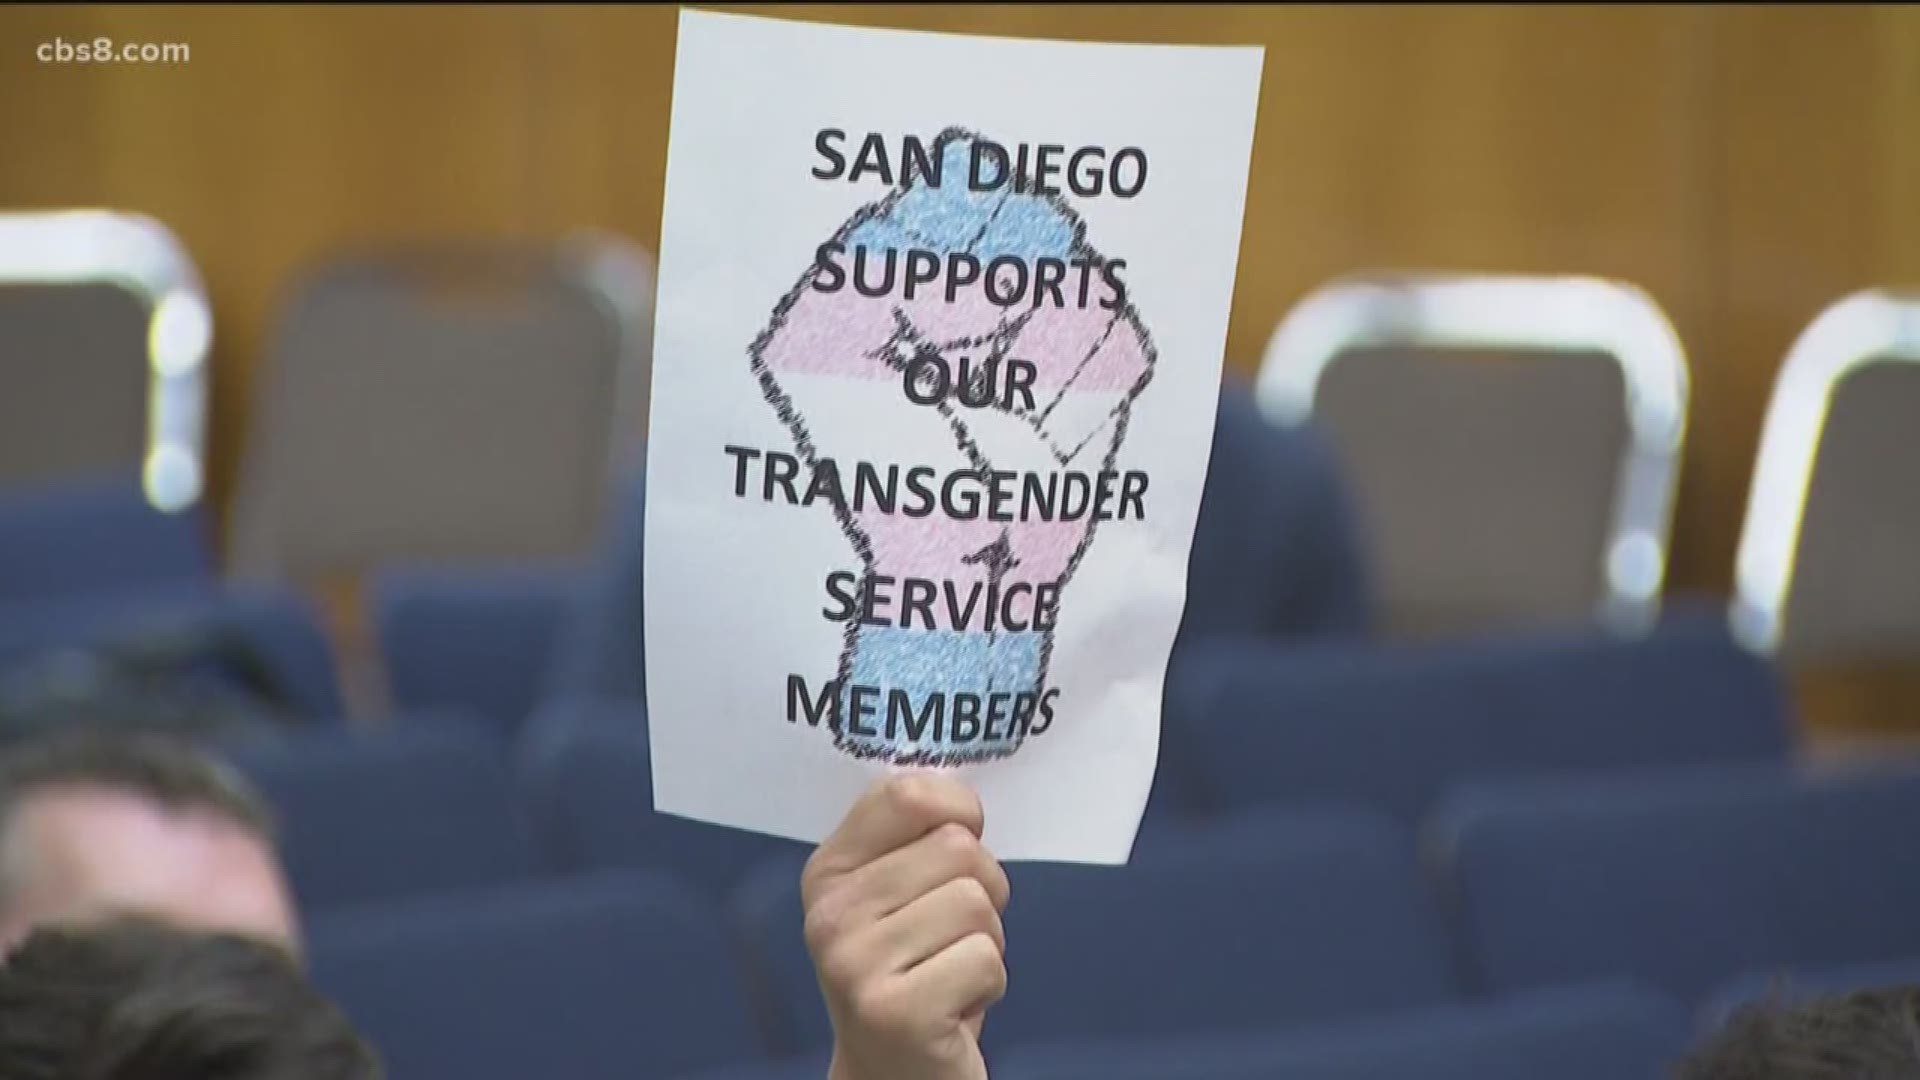 The San Diego City Council voted 7-1 Tuesday in favor of a resolution affirming the city's opposition to the federal government's exclusion of transgender people from joining the U.S. military.